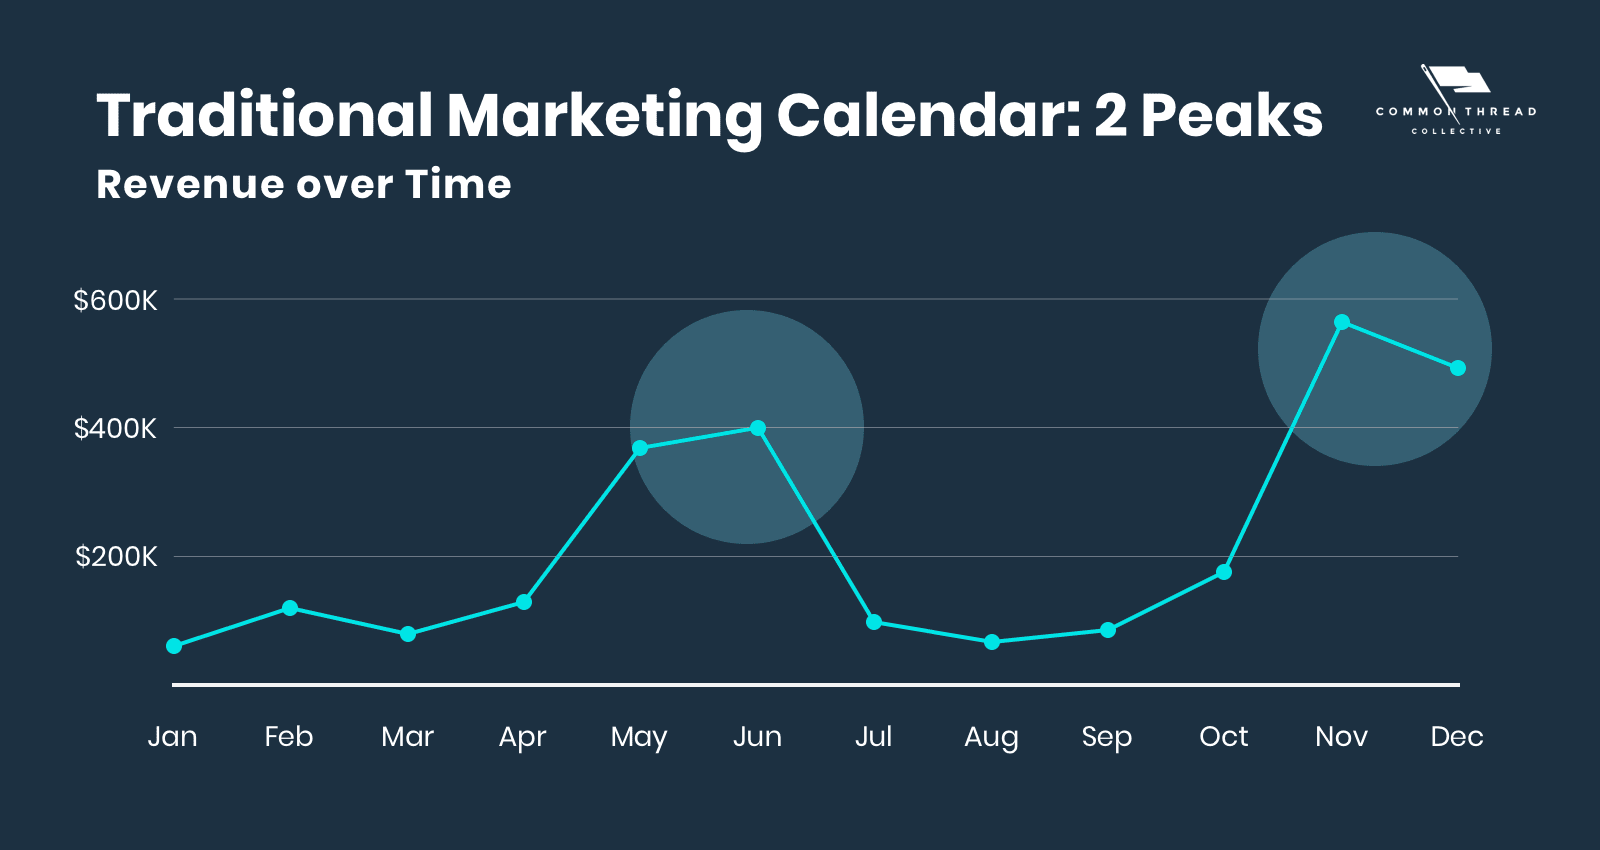 the traditional marketing calendar for most ecommerce businesses include two peaks